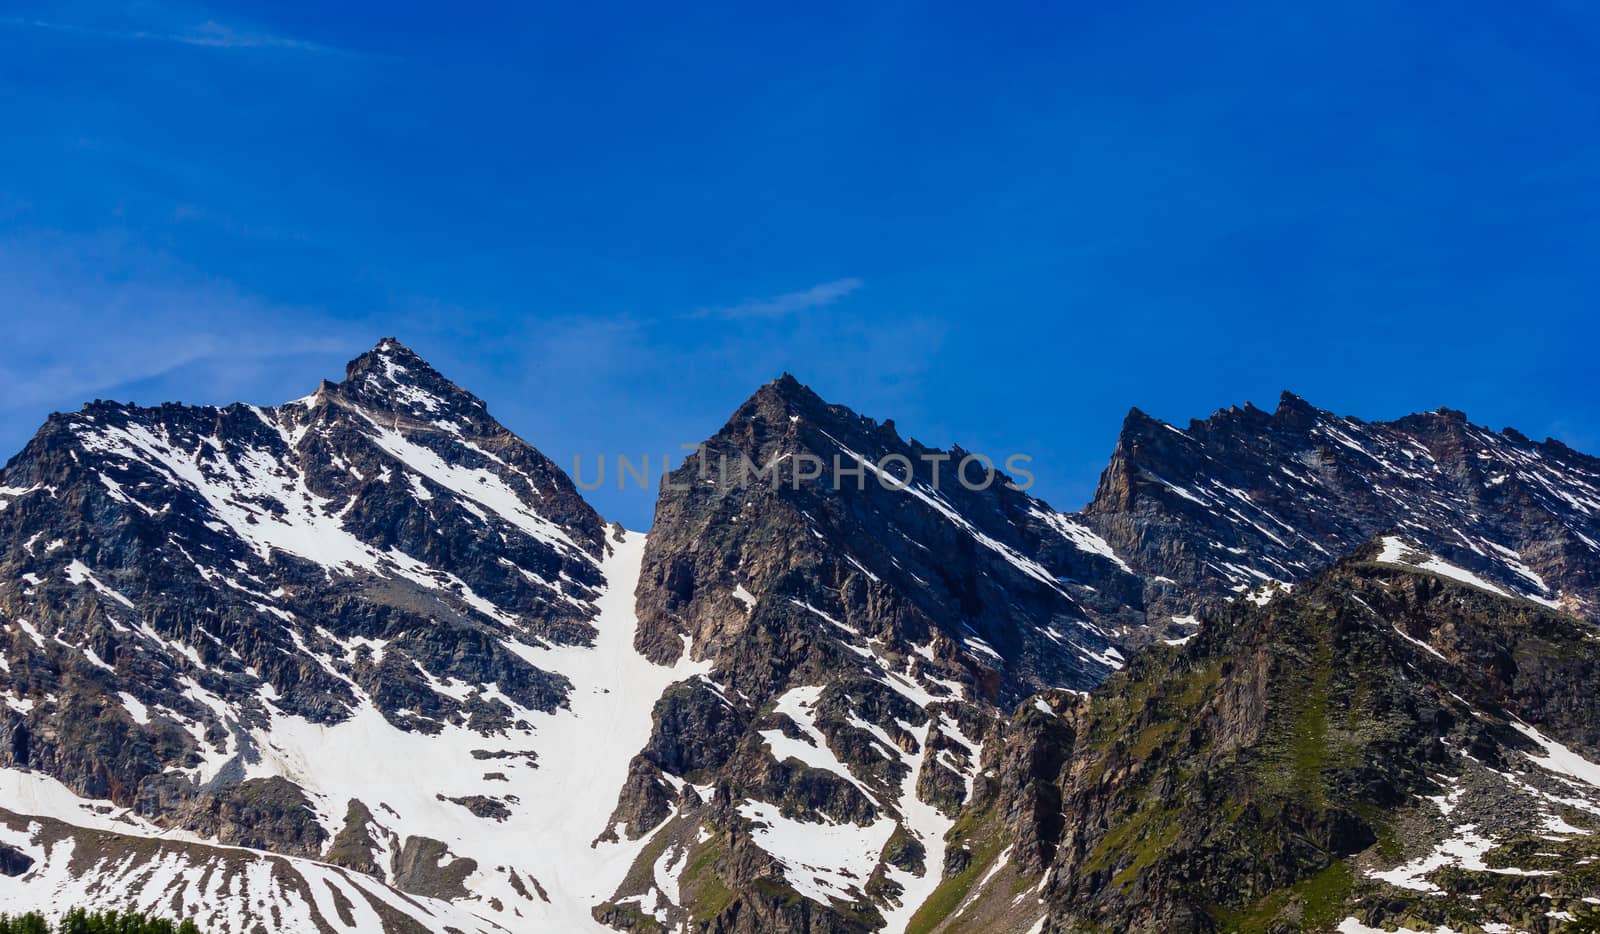 at the beginning of summer the mountains Three Leavanne with their 3500 metres height,are covered with snow